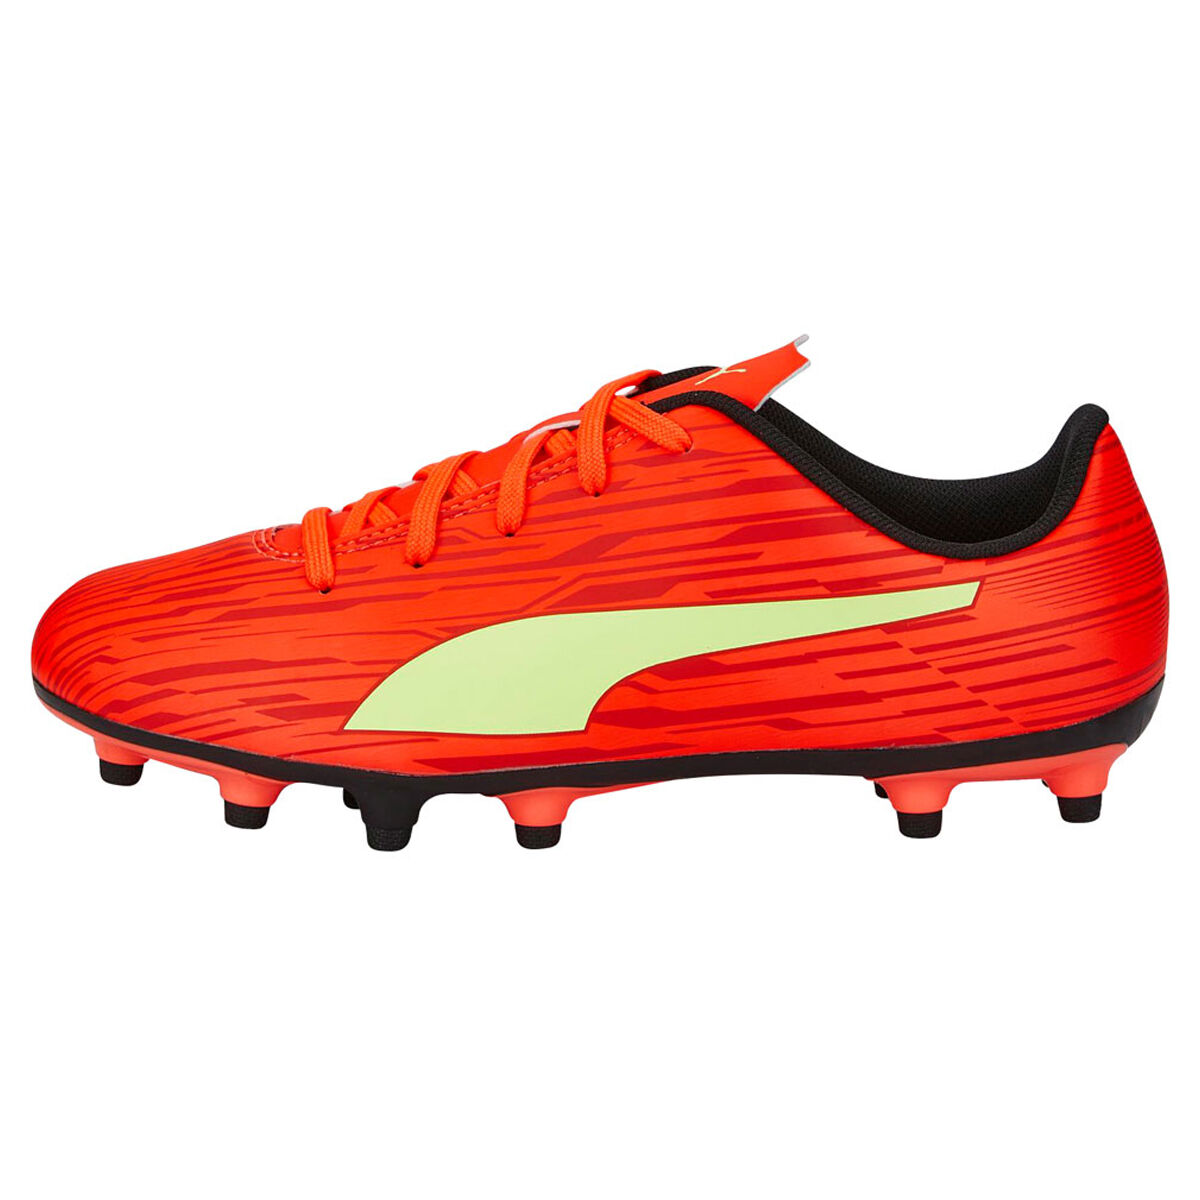 OUTVIE Breathable High-Top Football Boots with Cleat for Unisex Boys/Girls Soccer Shoes 